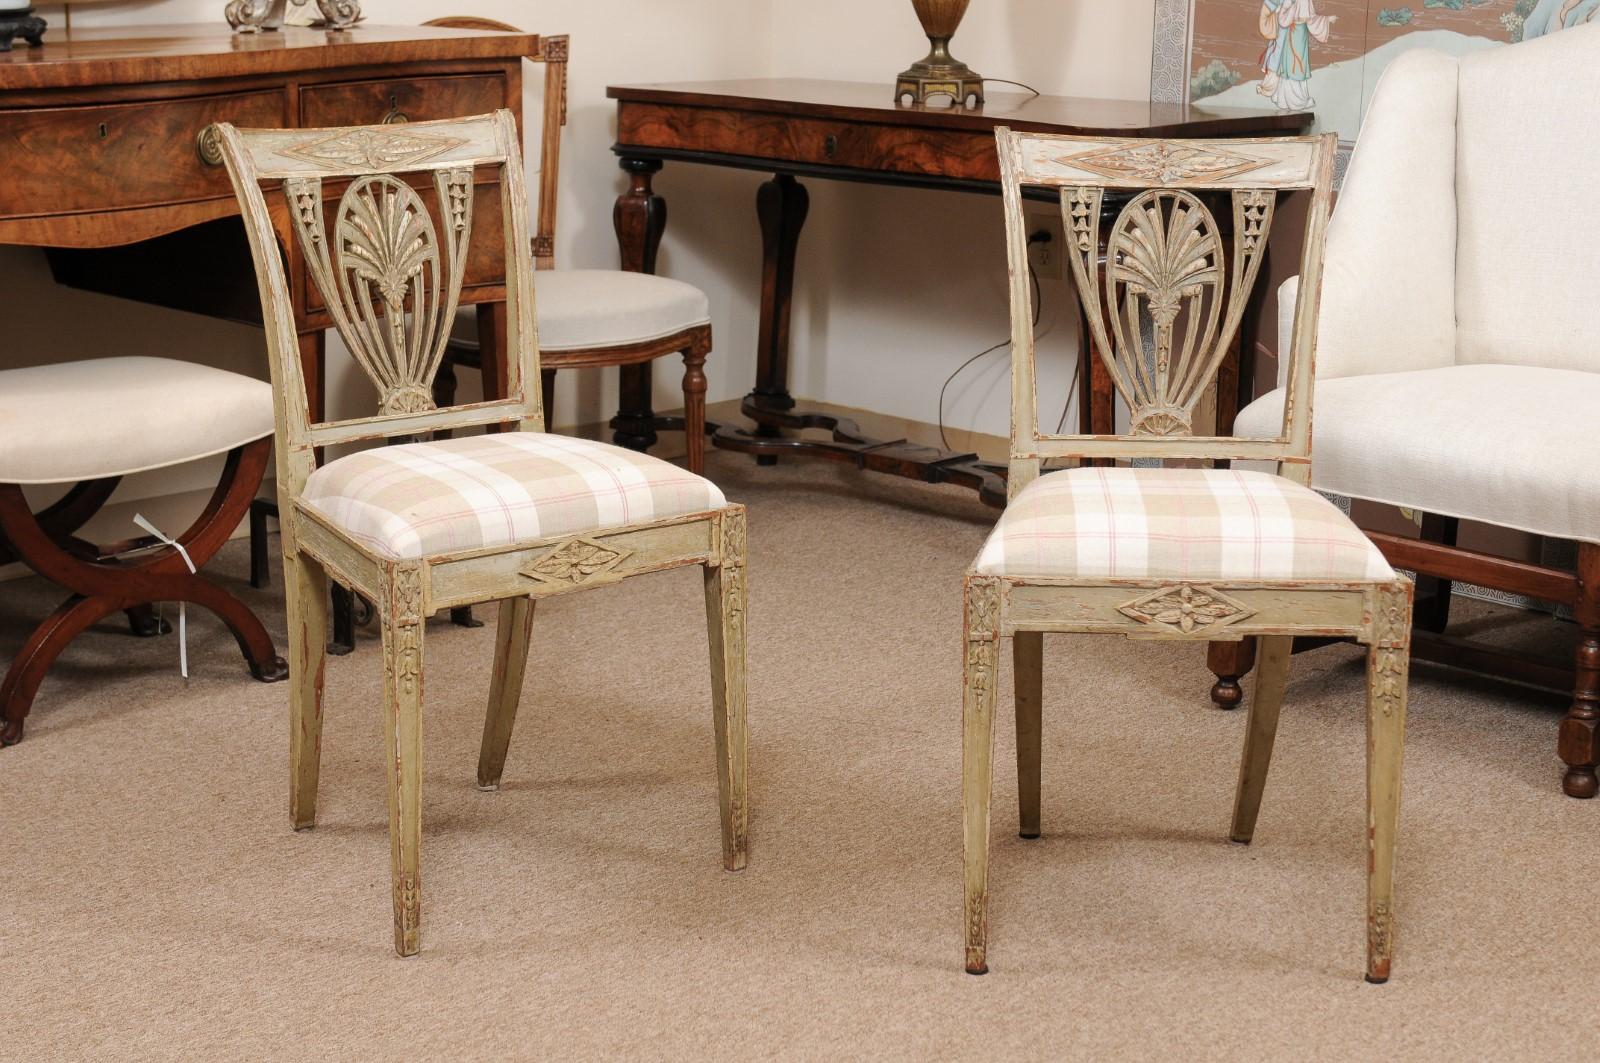 The pair of painted pale green Swedish side chairs with carved back spats, slip in plaid linen upholstered seats, carved frieze and tapered legs below.